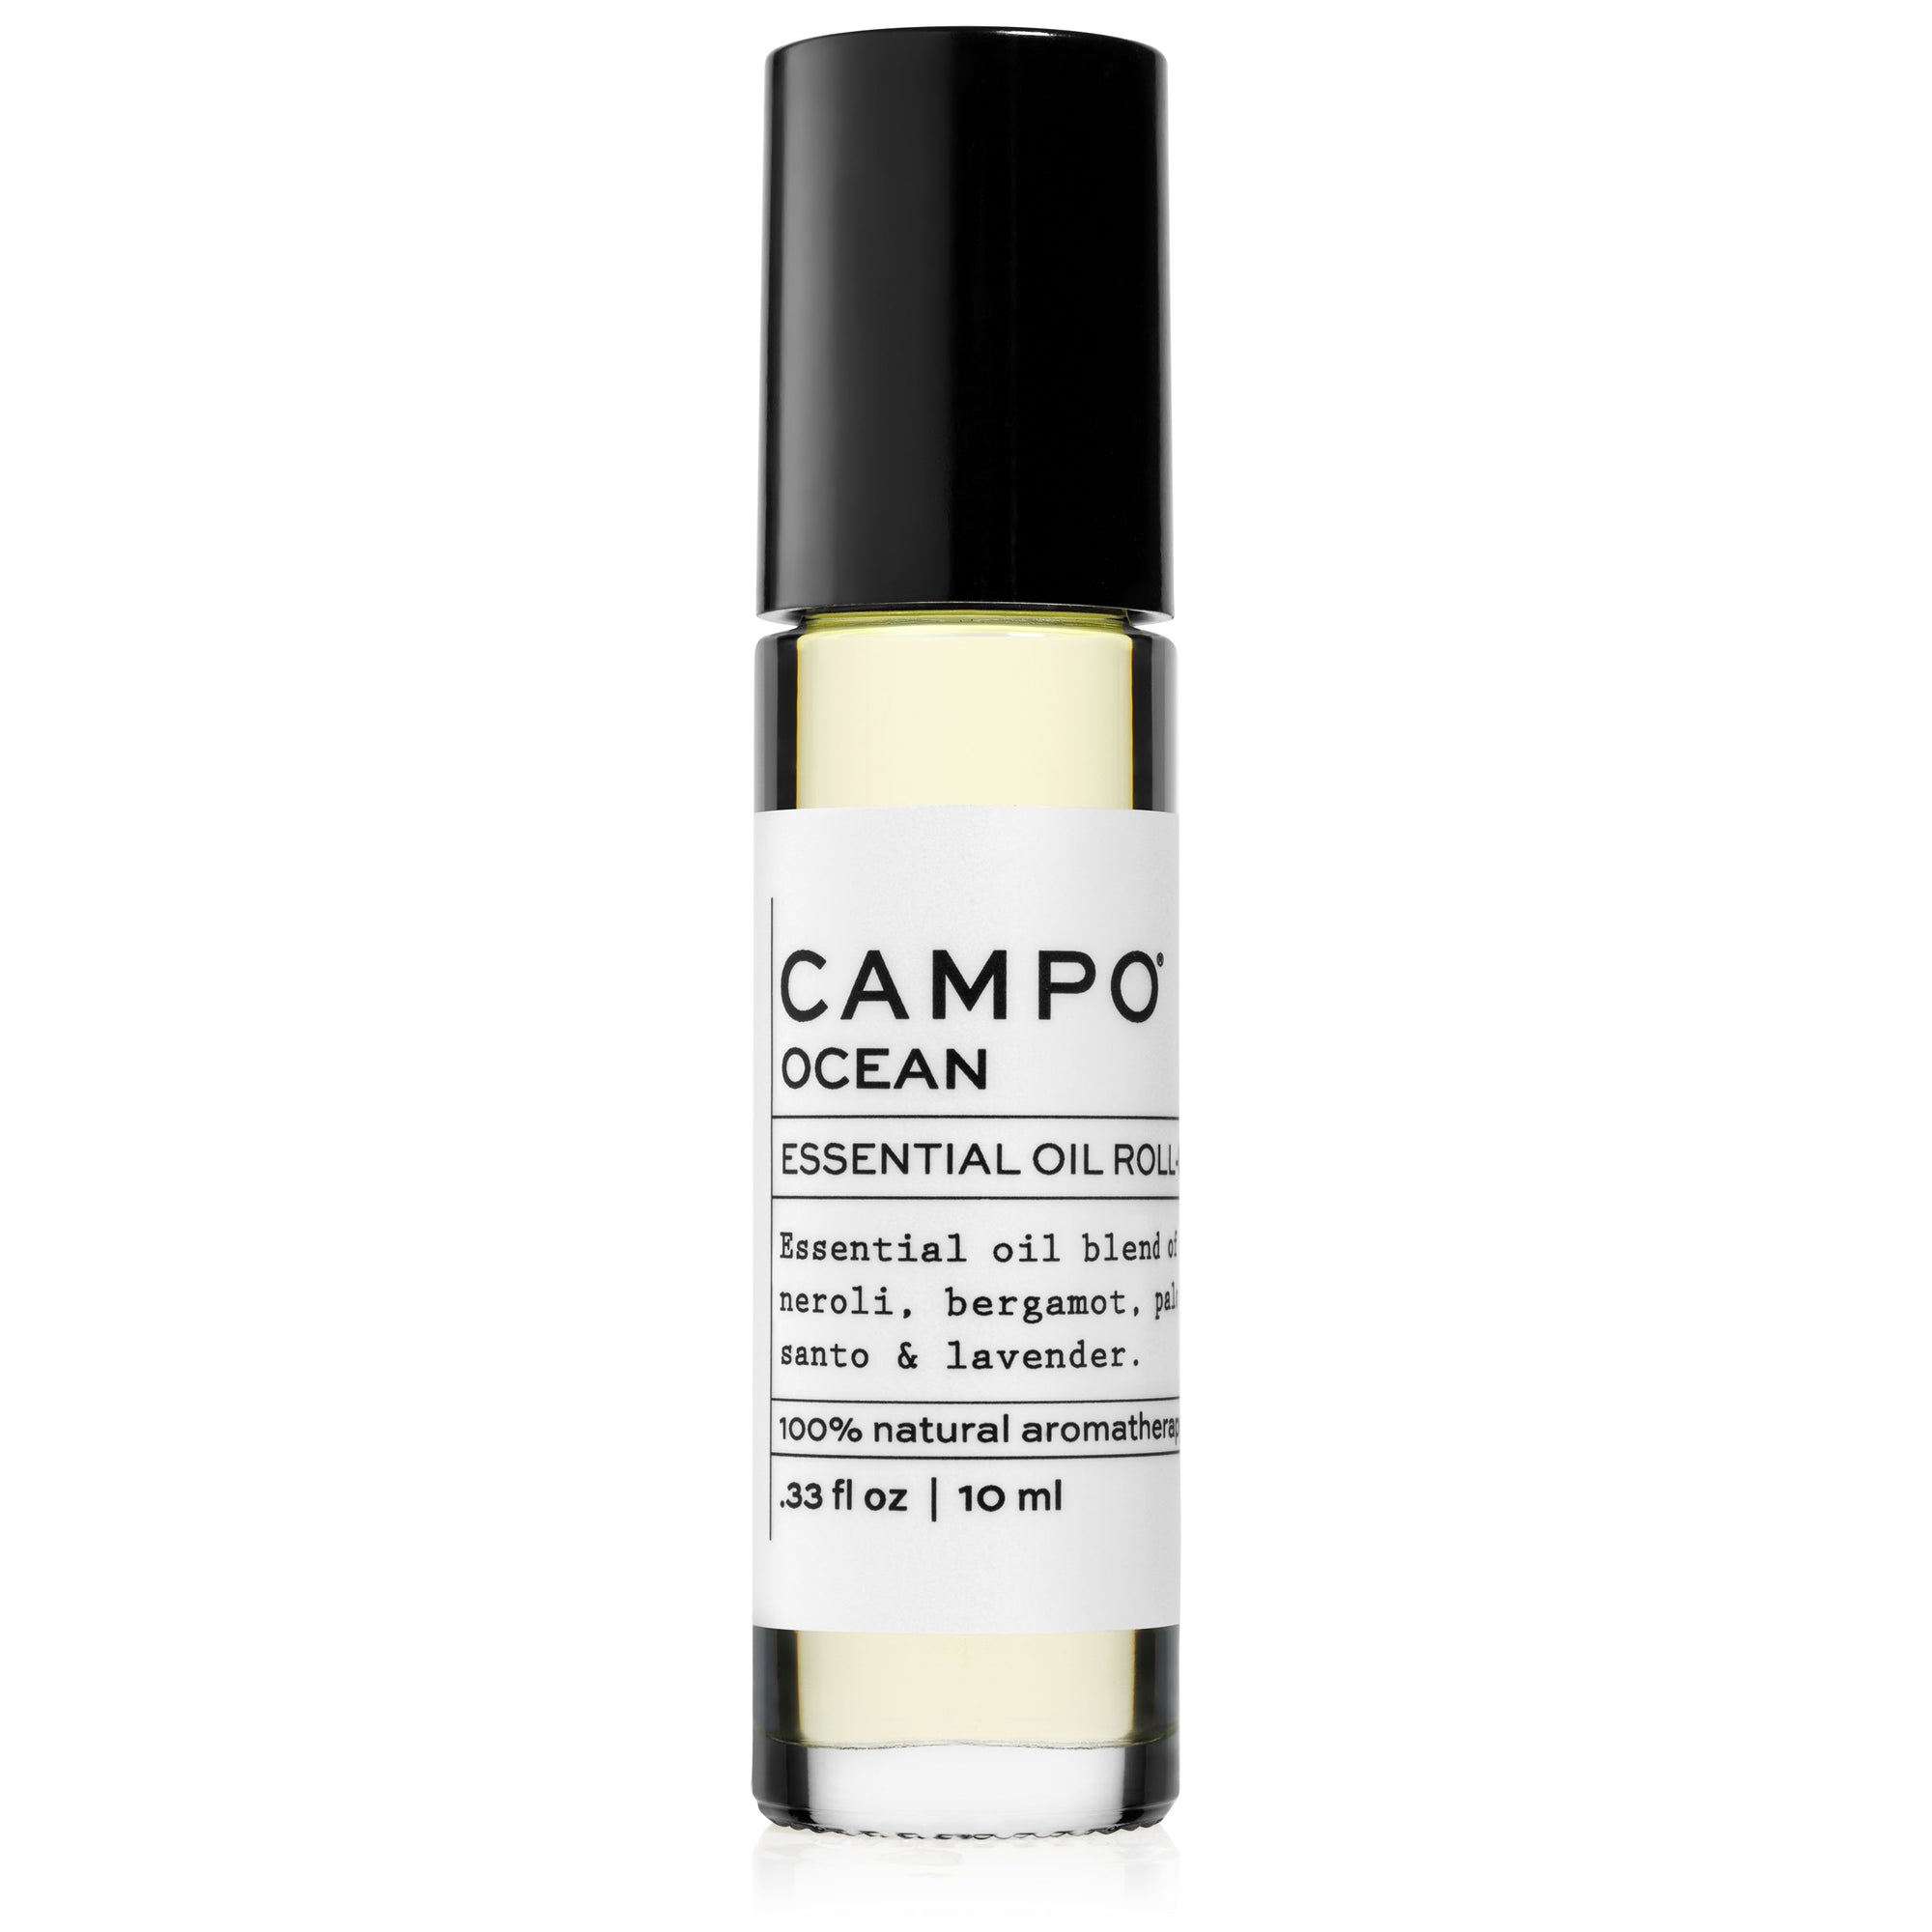 Campo Beauty OCEAN Essential Oil Roll-On in 5 ml. Escape to the ocean with this 100% pure essential oil blend of neroli, palo santo, lavender, and bergamot. Inspired by walks on the beach with orange blossoms in your hair, coastal lavender & driftwood from the sea.